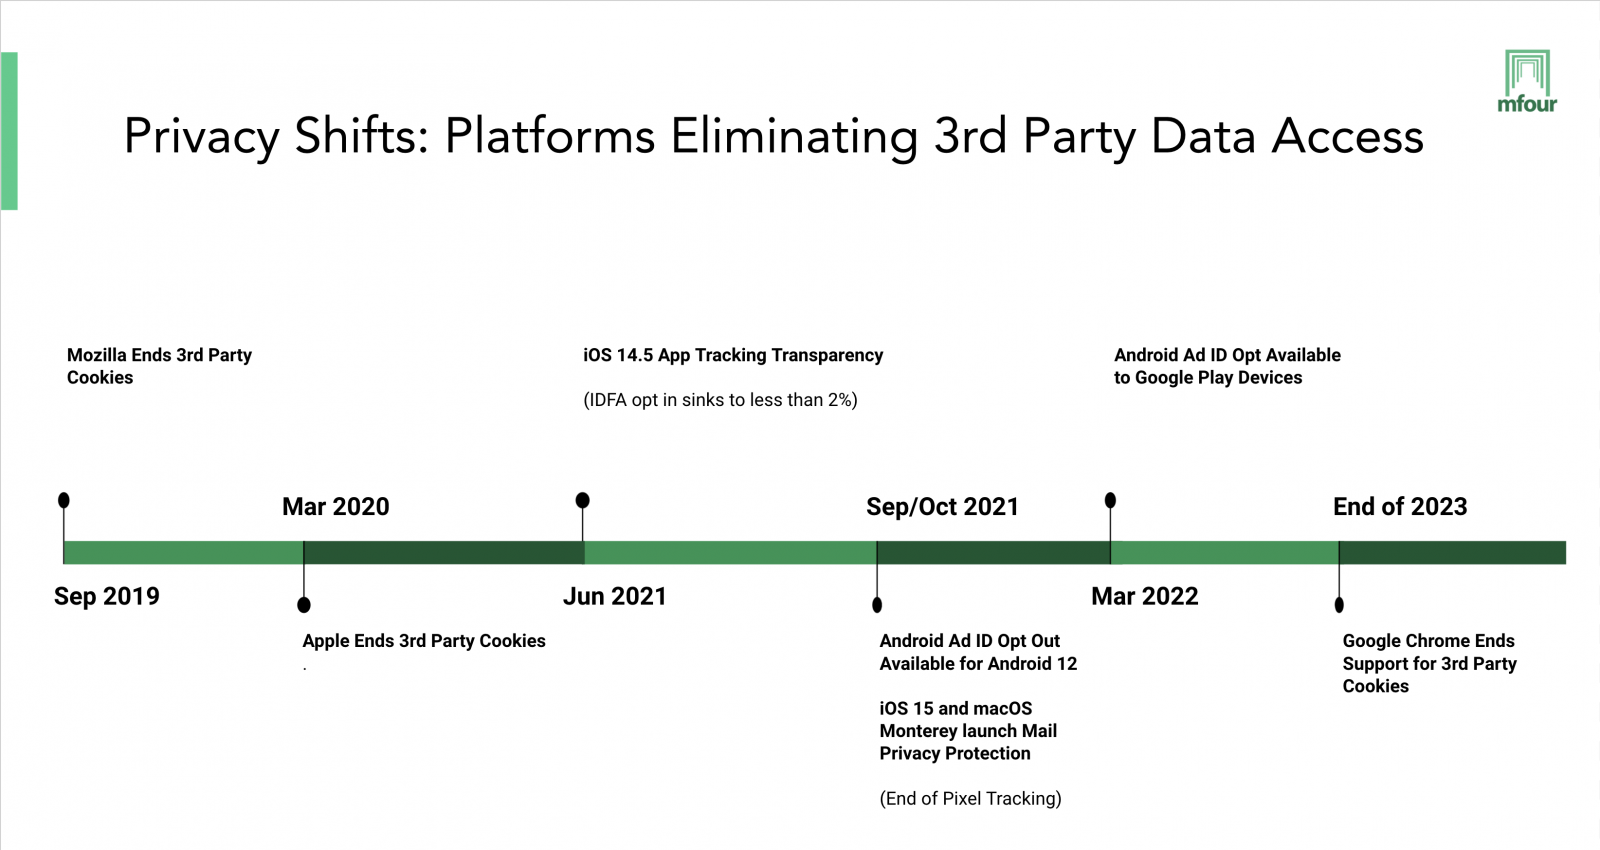 Privacy Shifts: Platforms Eliminating 3rd Party Data Access